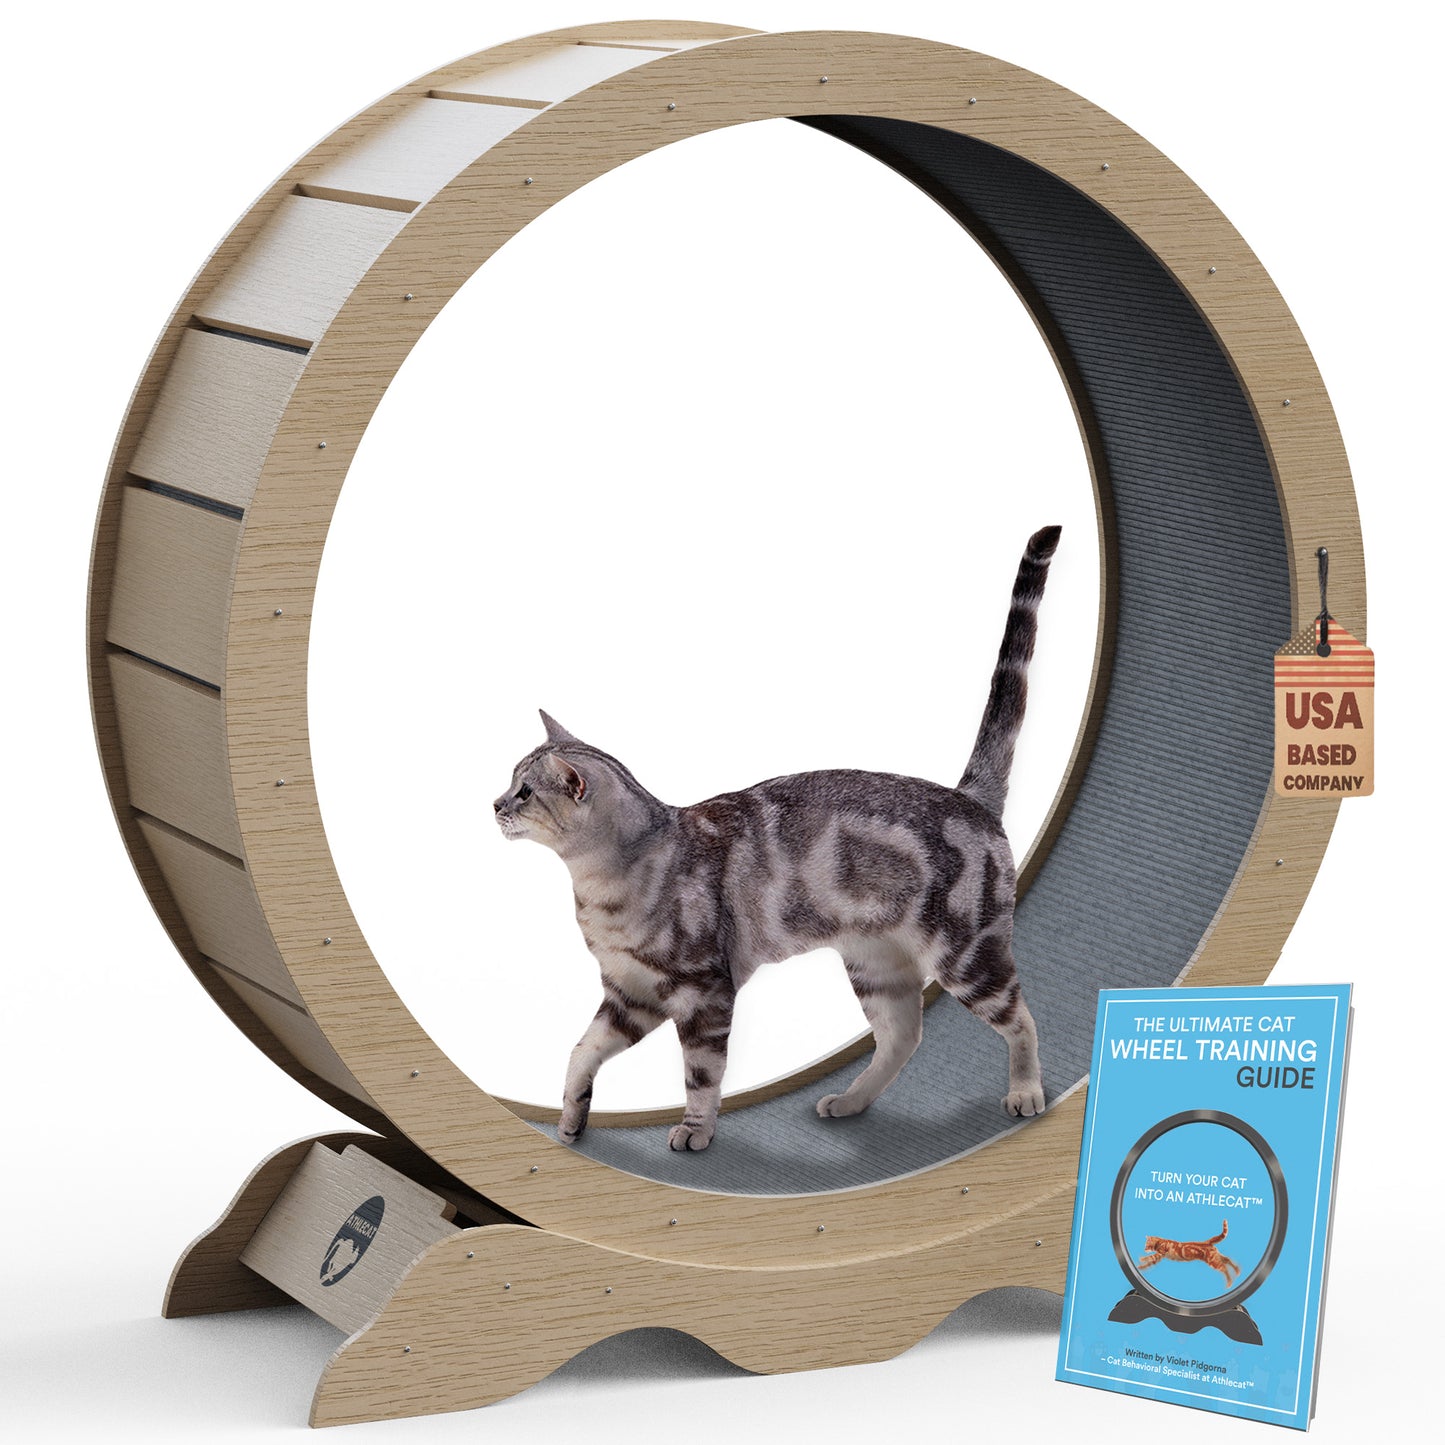 Cat exercise wheel made of wood with training guide 